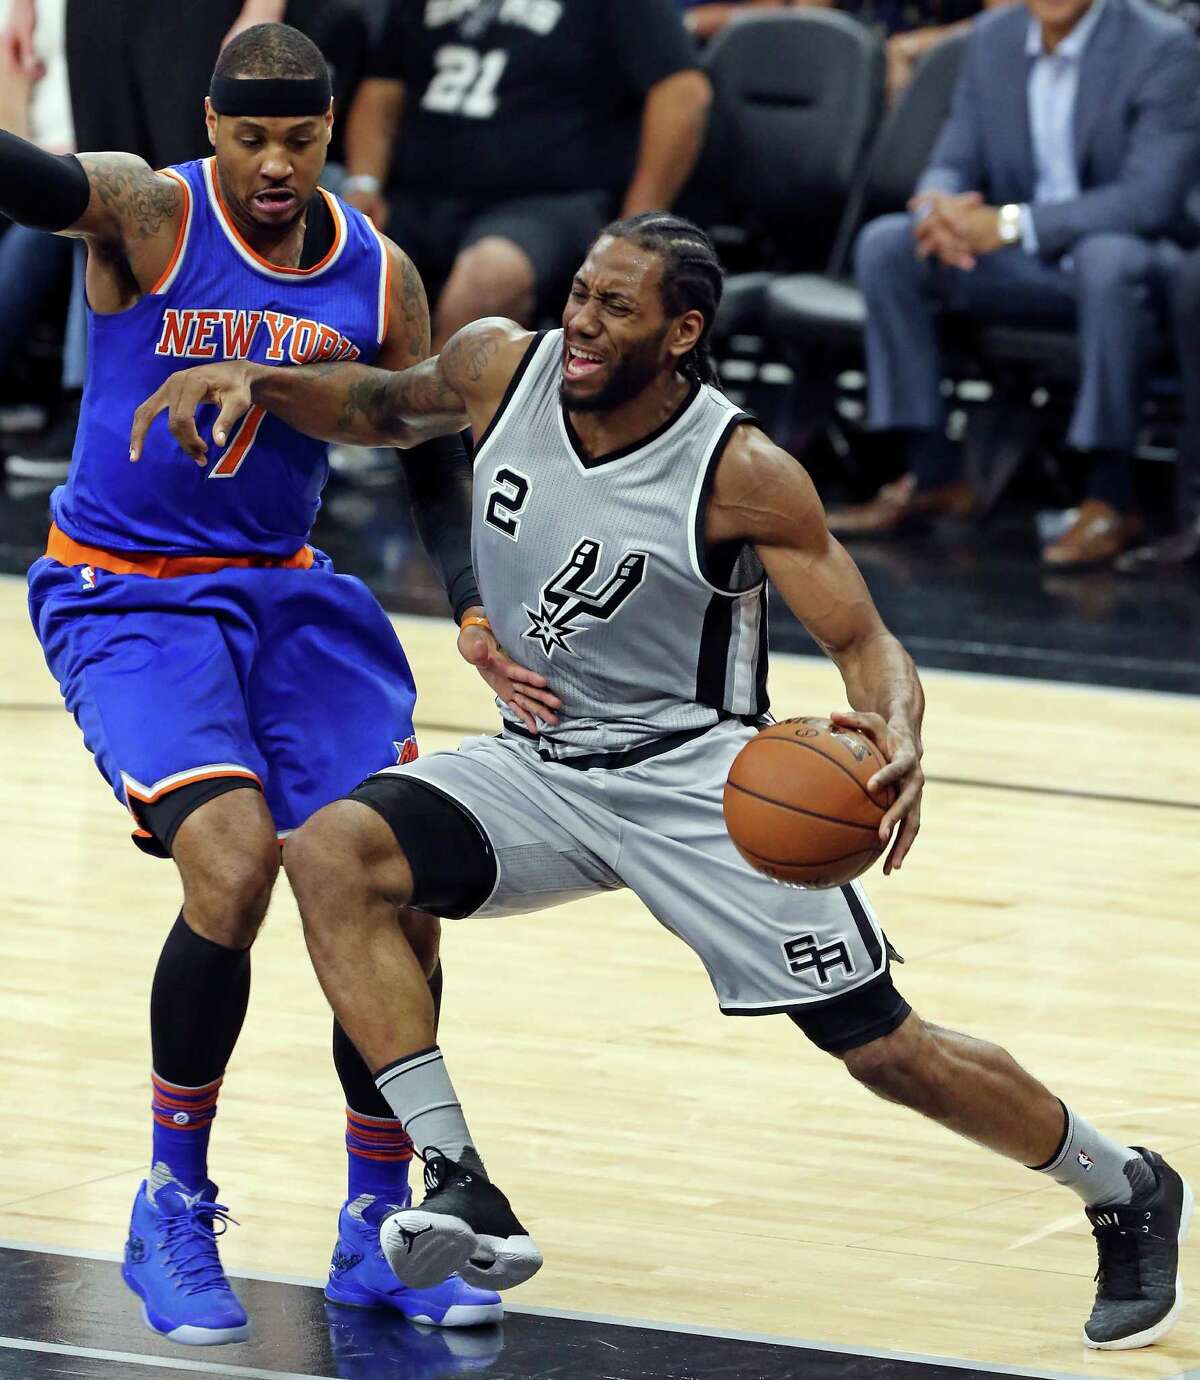 San Antonio Spurs' Kawhi Leonard looks for room around New York Knicks' Carmelo Anthony during first half action Friday Jan. 8, 2016 at the AT&T Center.